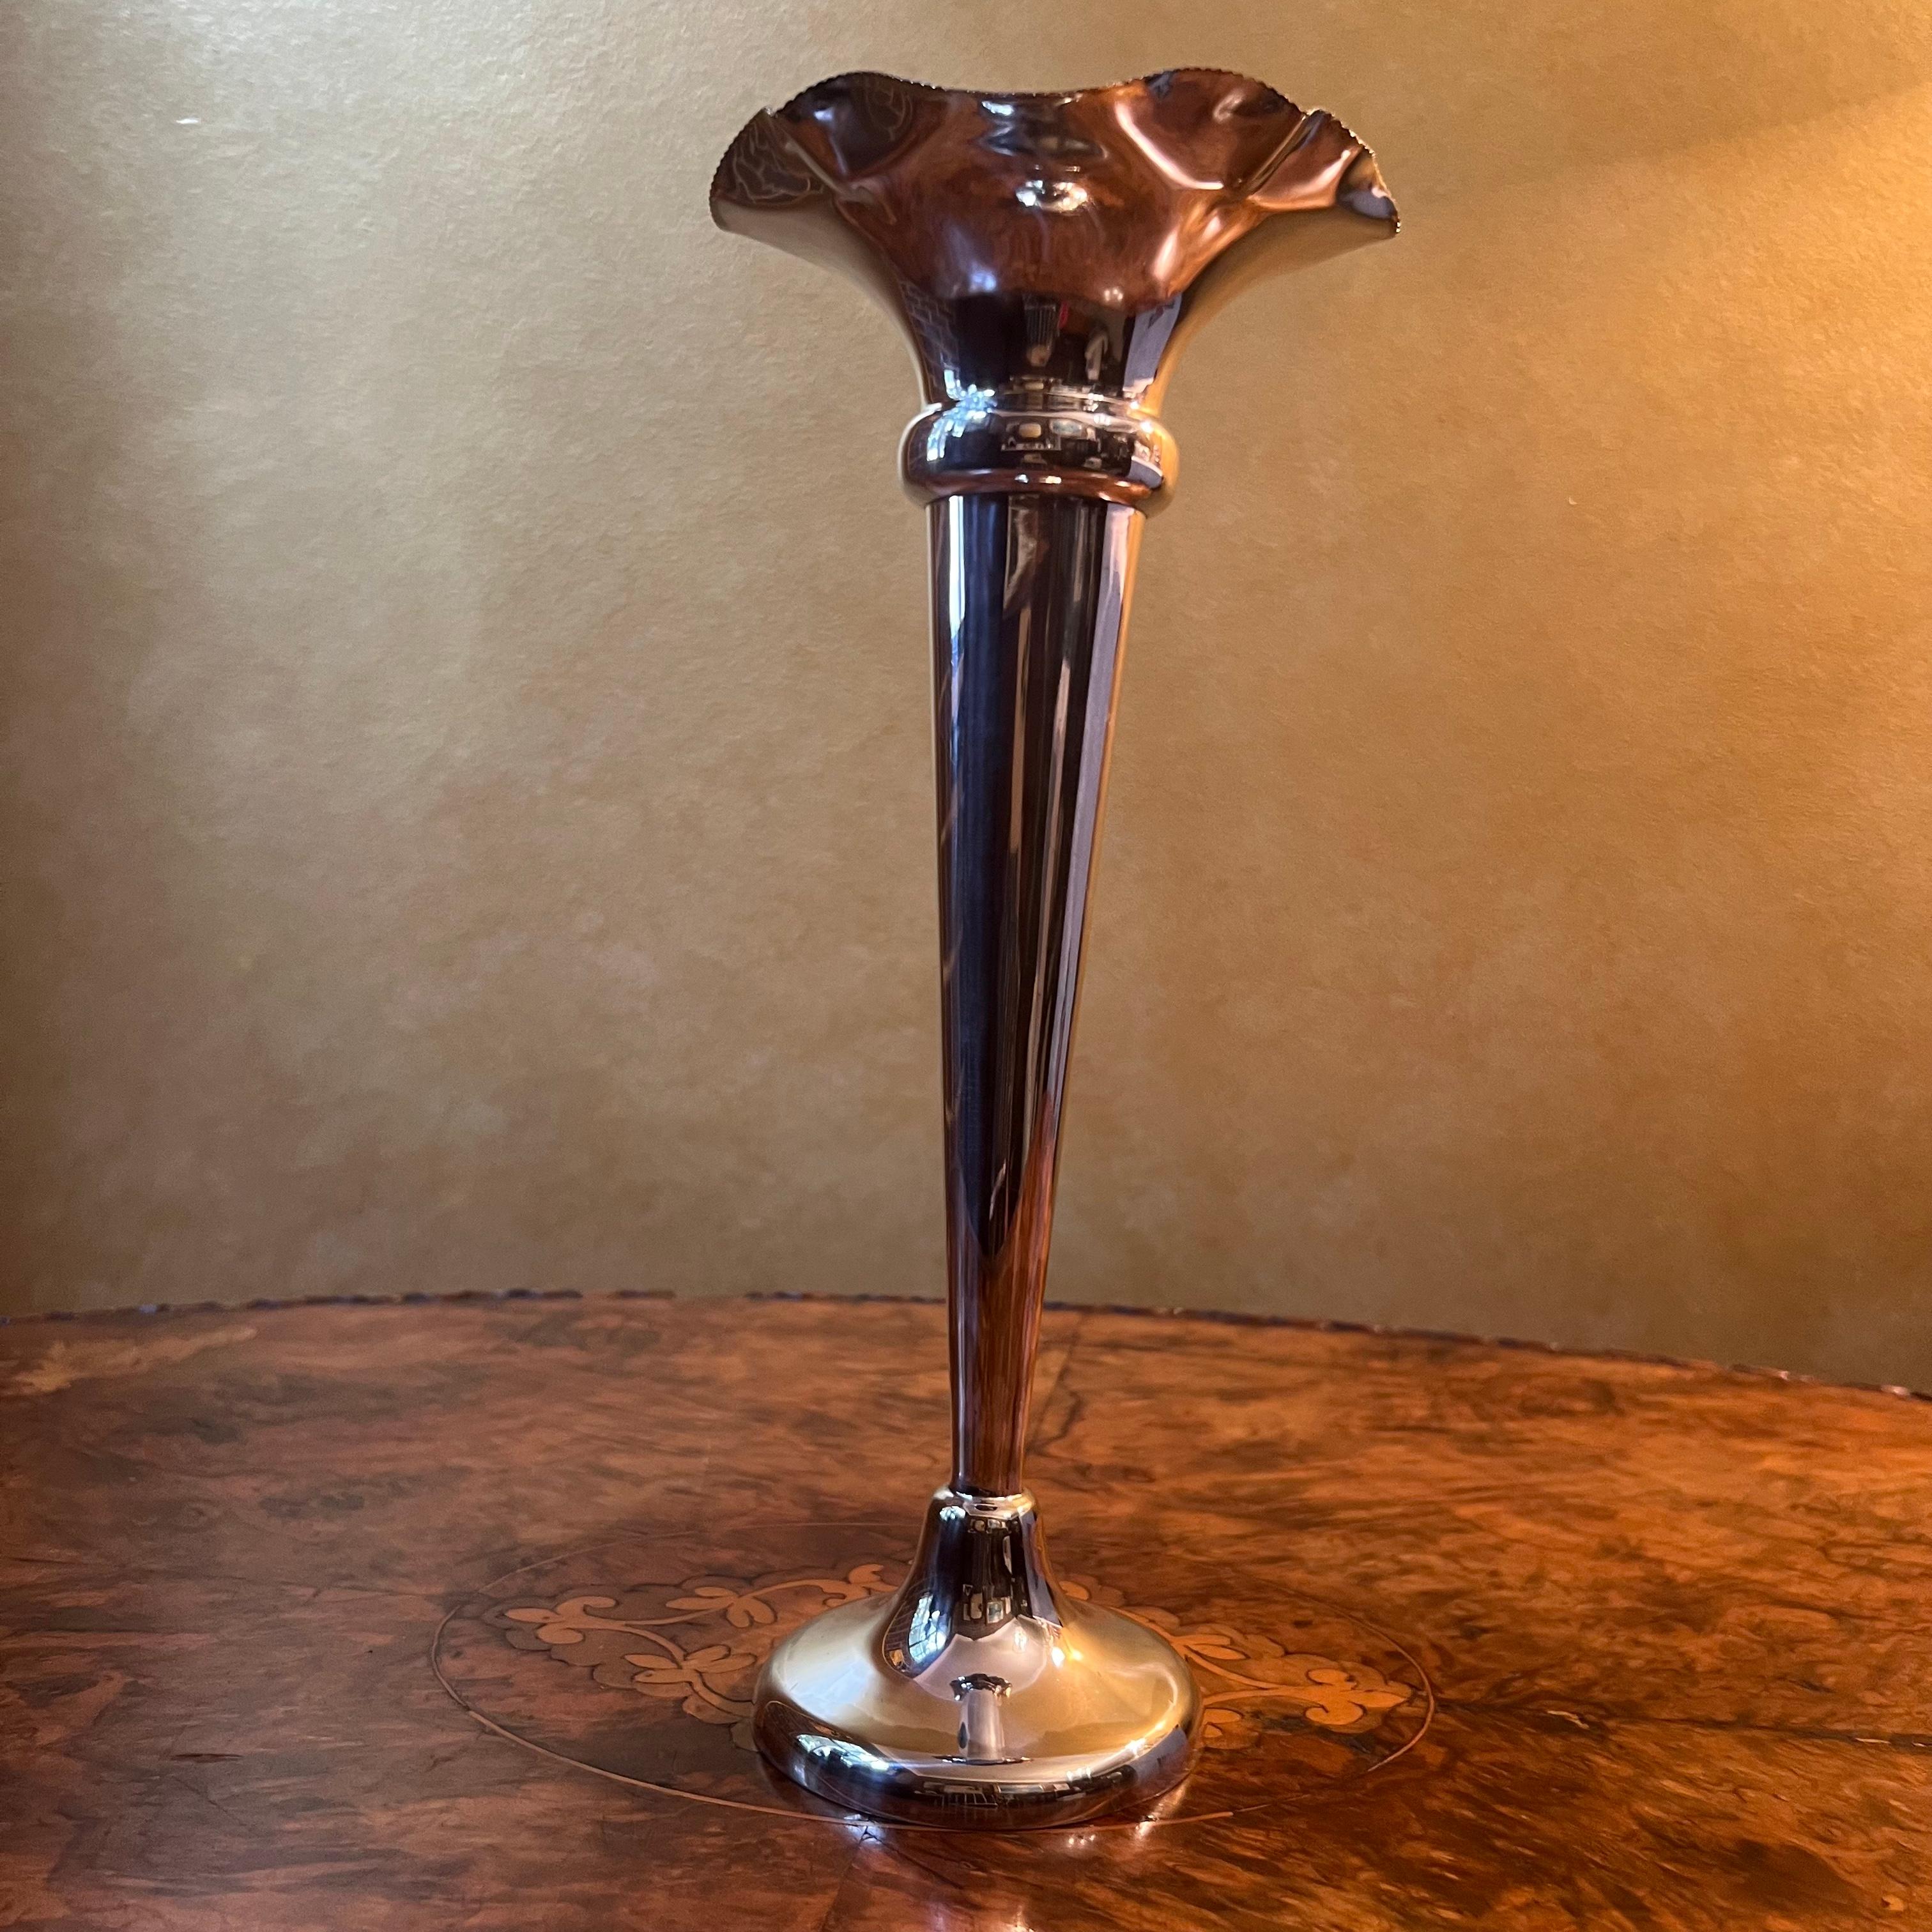 Trumpet style vase with frilly like top, inside top there are some fad marks to silver, some small dents and marks, has been professionally polished. 

Material: Silver Plated

Measurements:  25.5cm high, 11cm diameter top

Postage via Australia